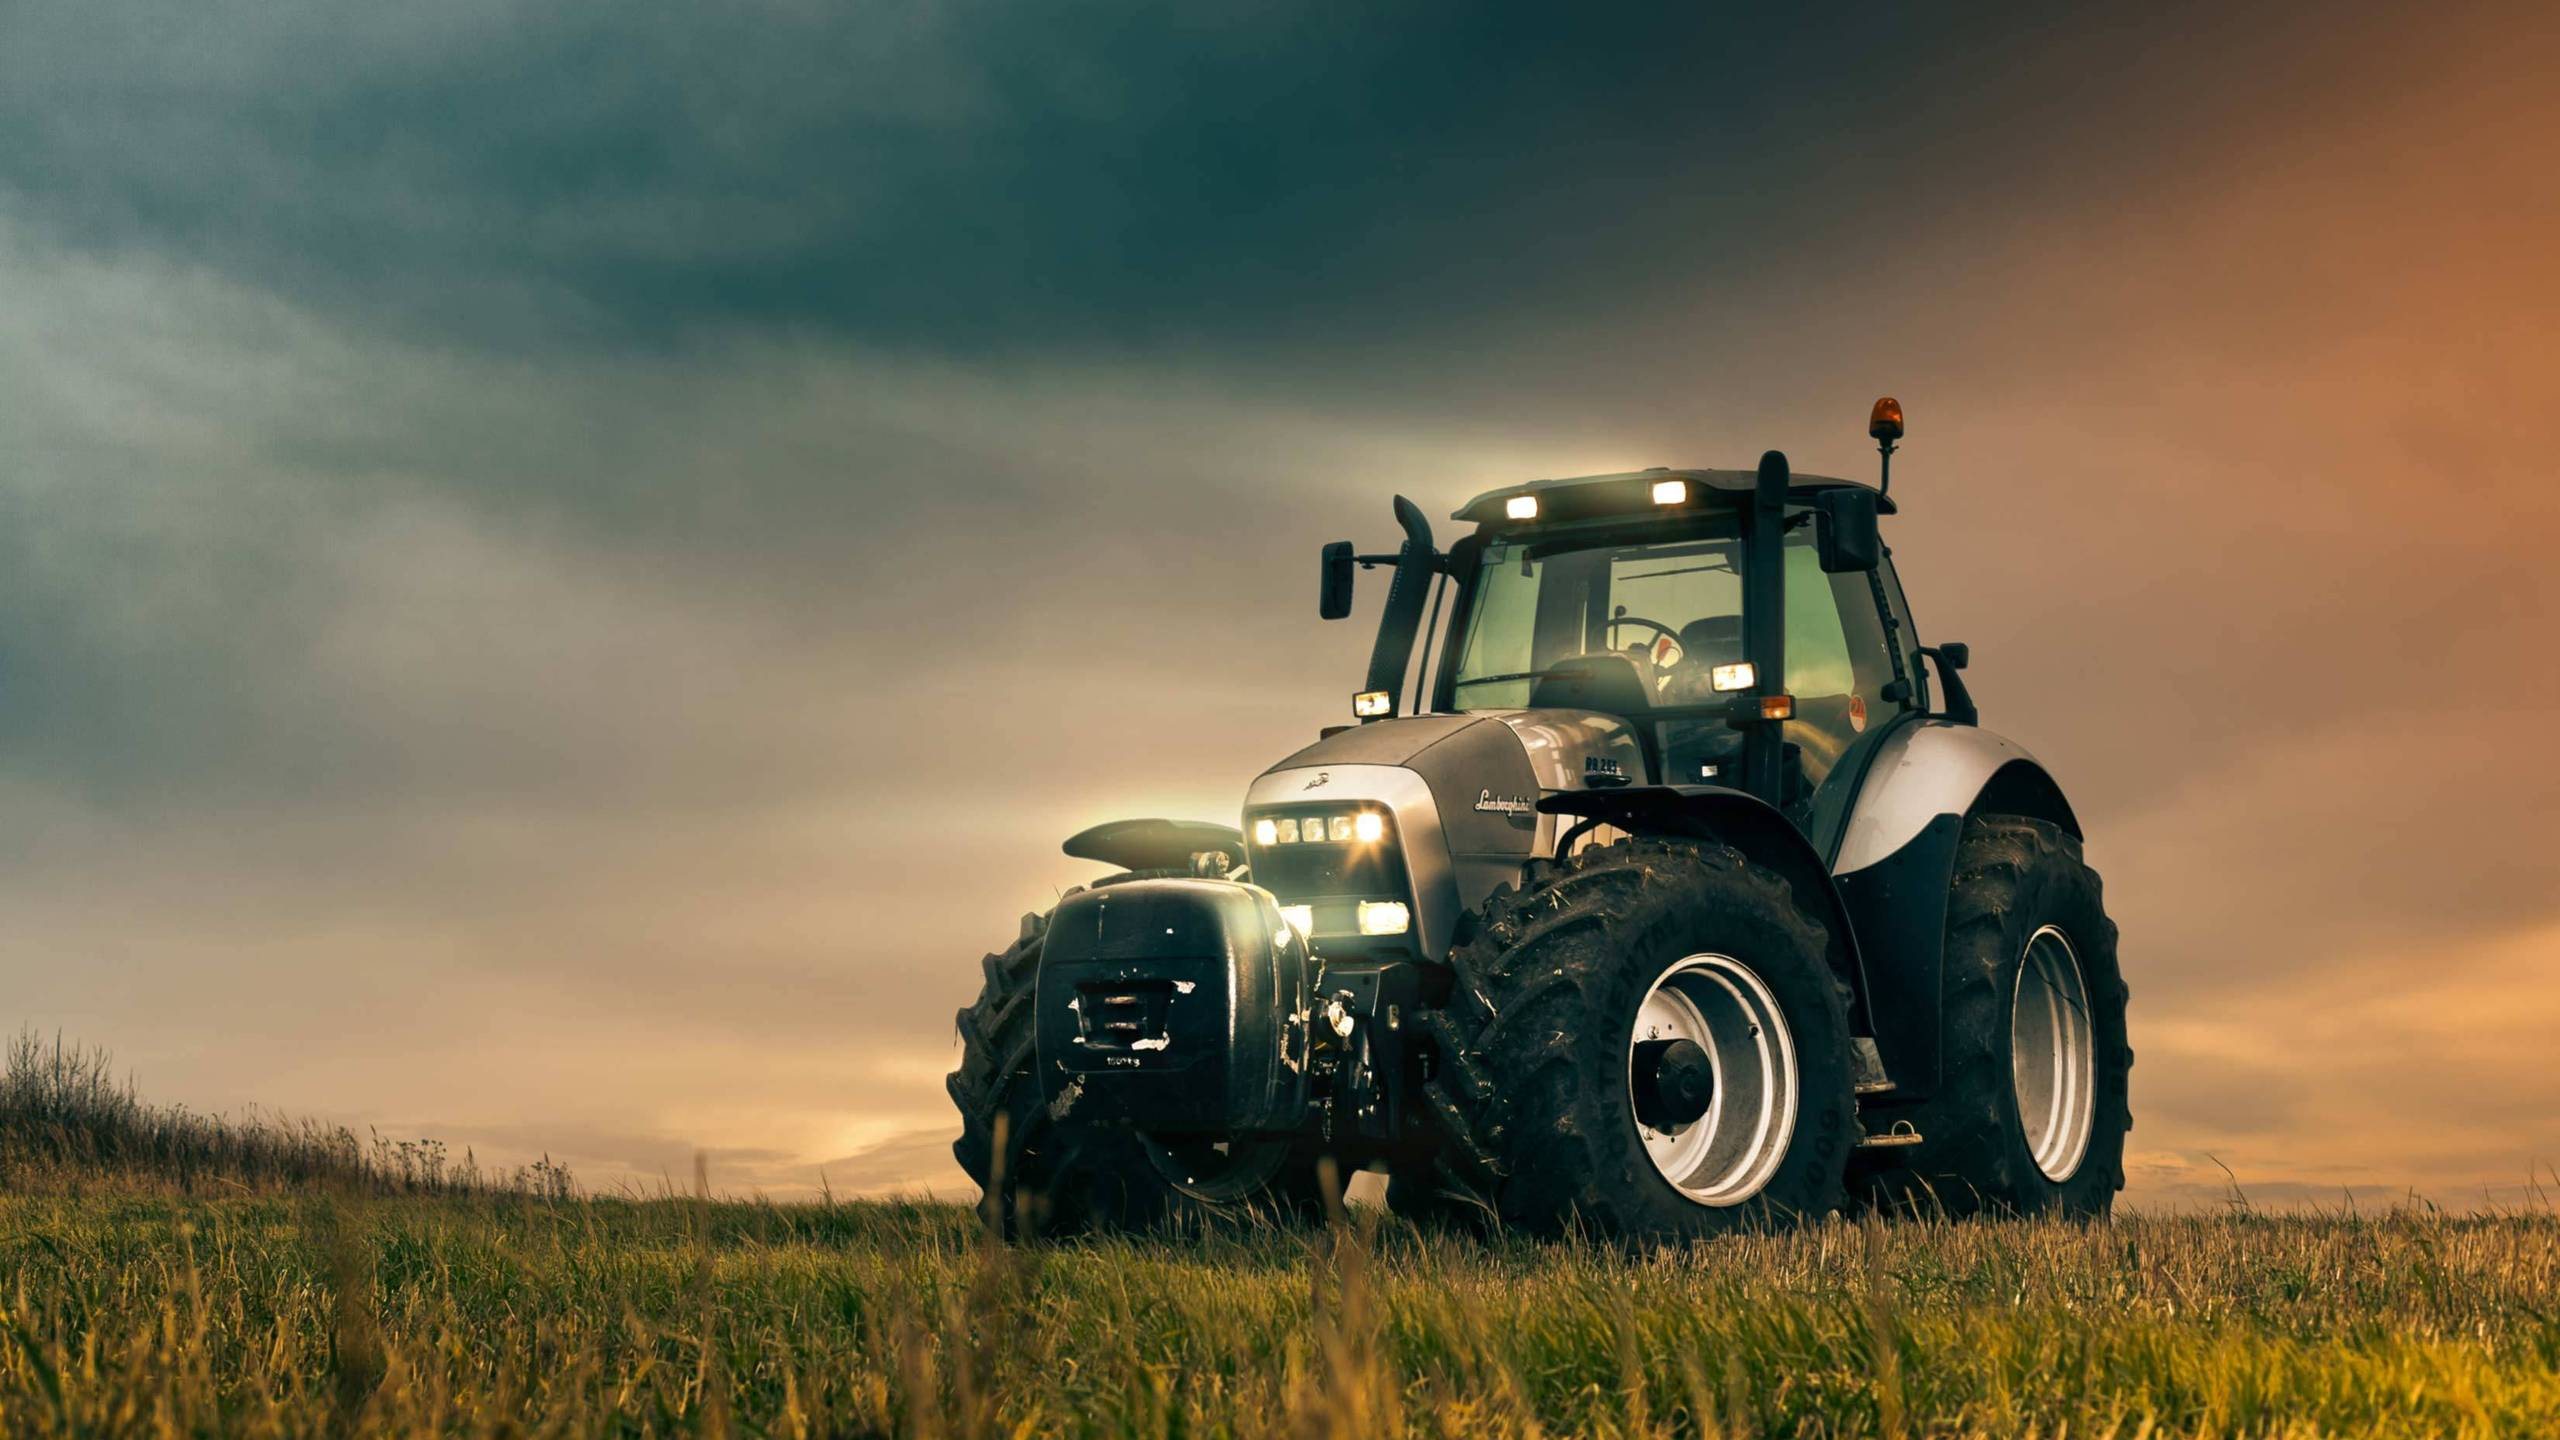 Popular Tractor Image for Phone